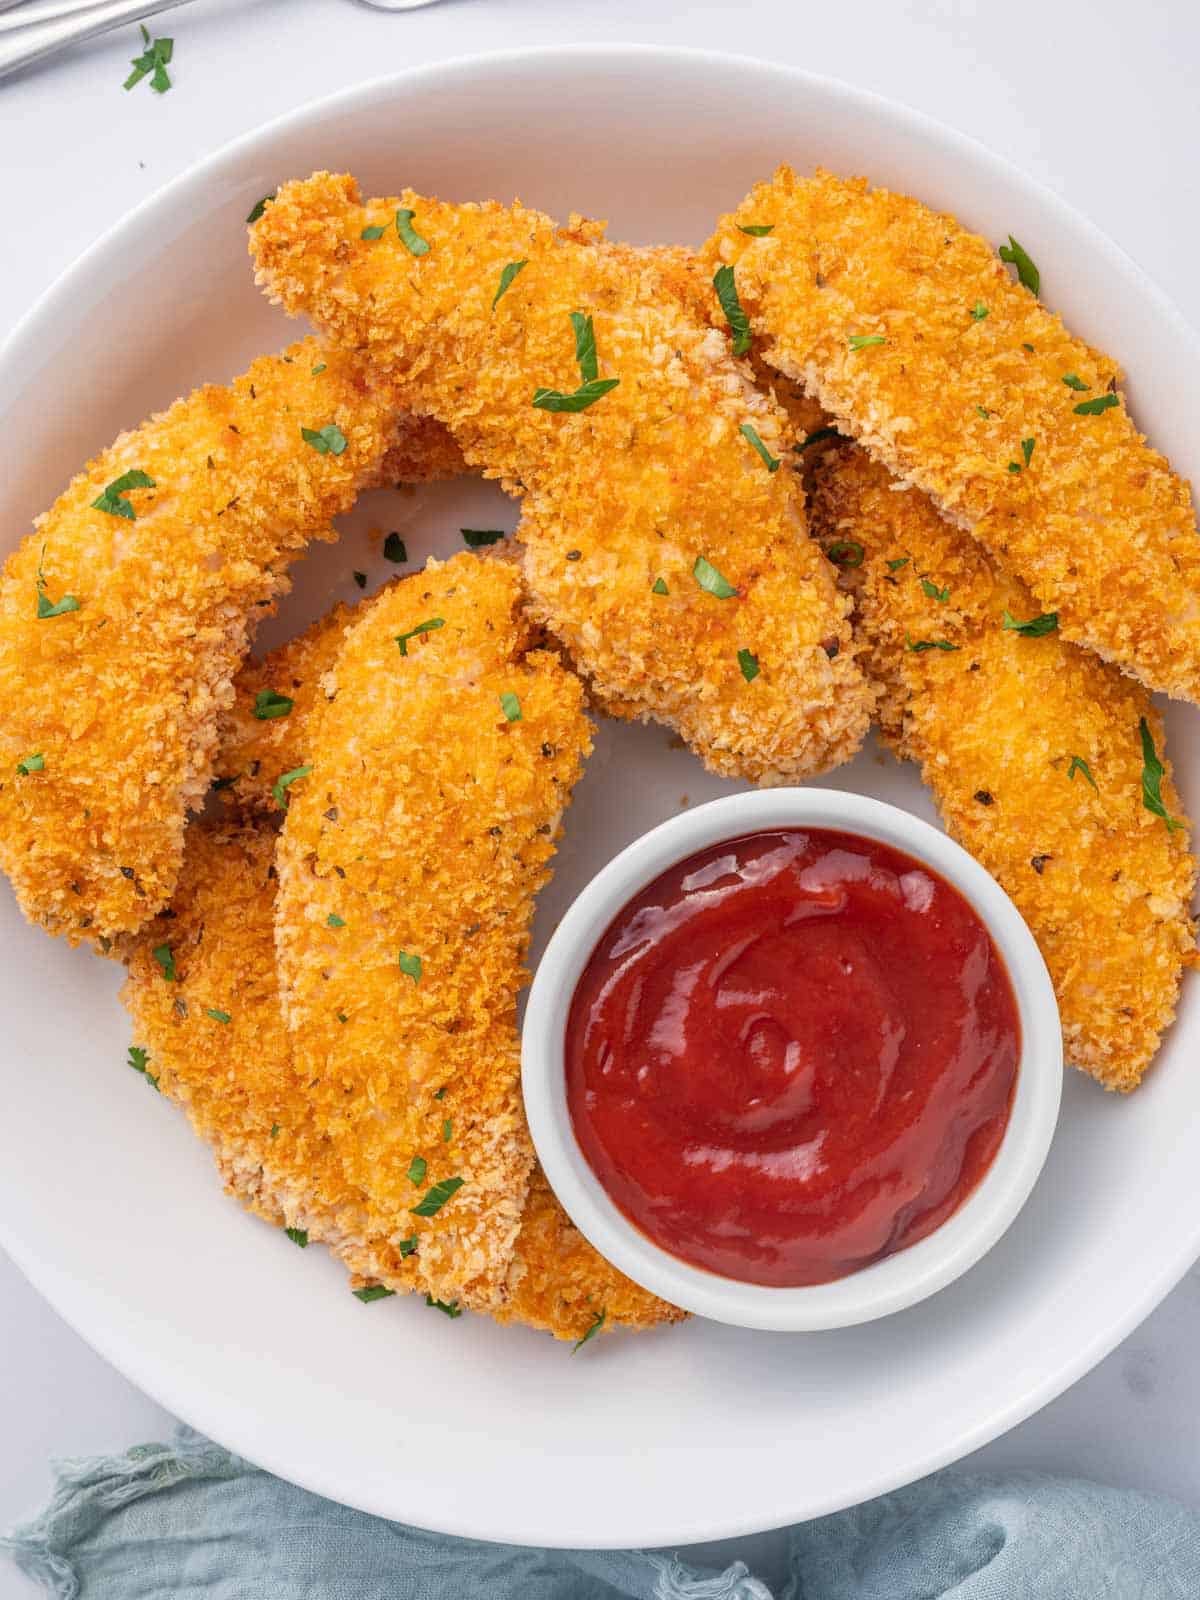 Panko crusted chicken on a plate with ketchup.